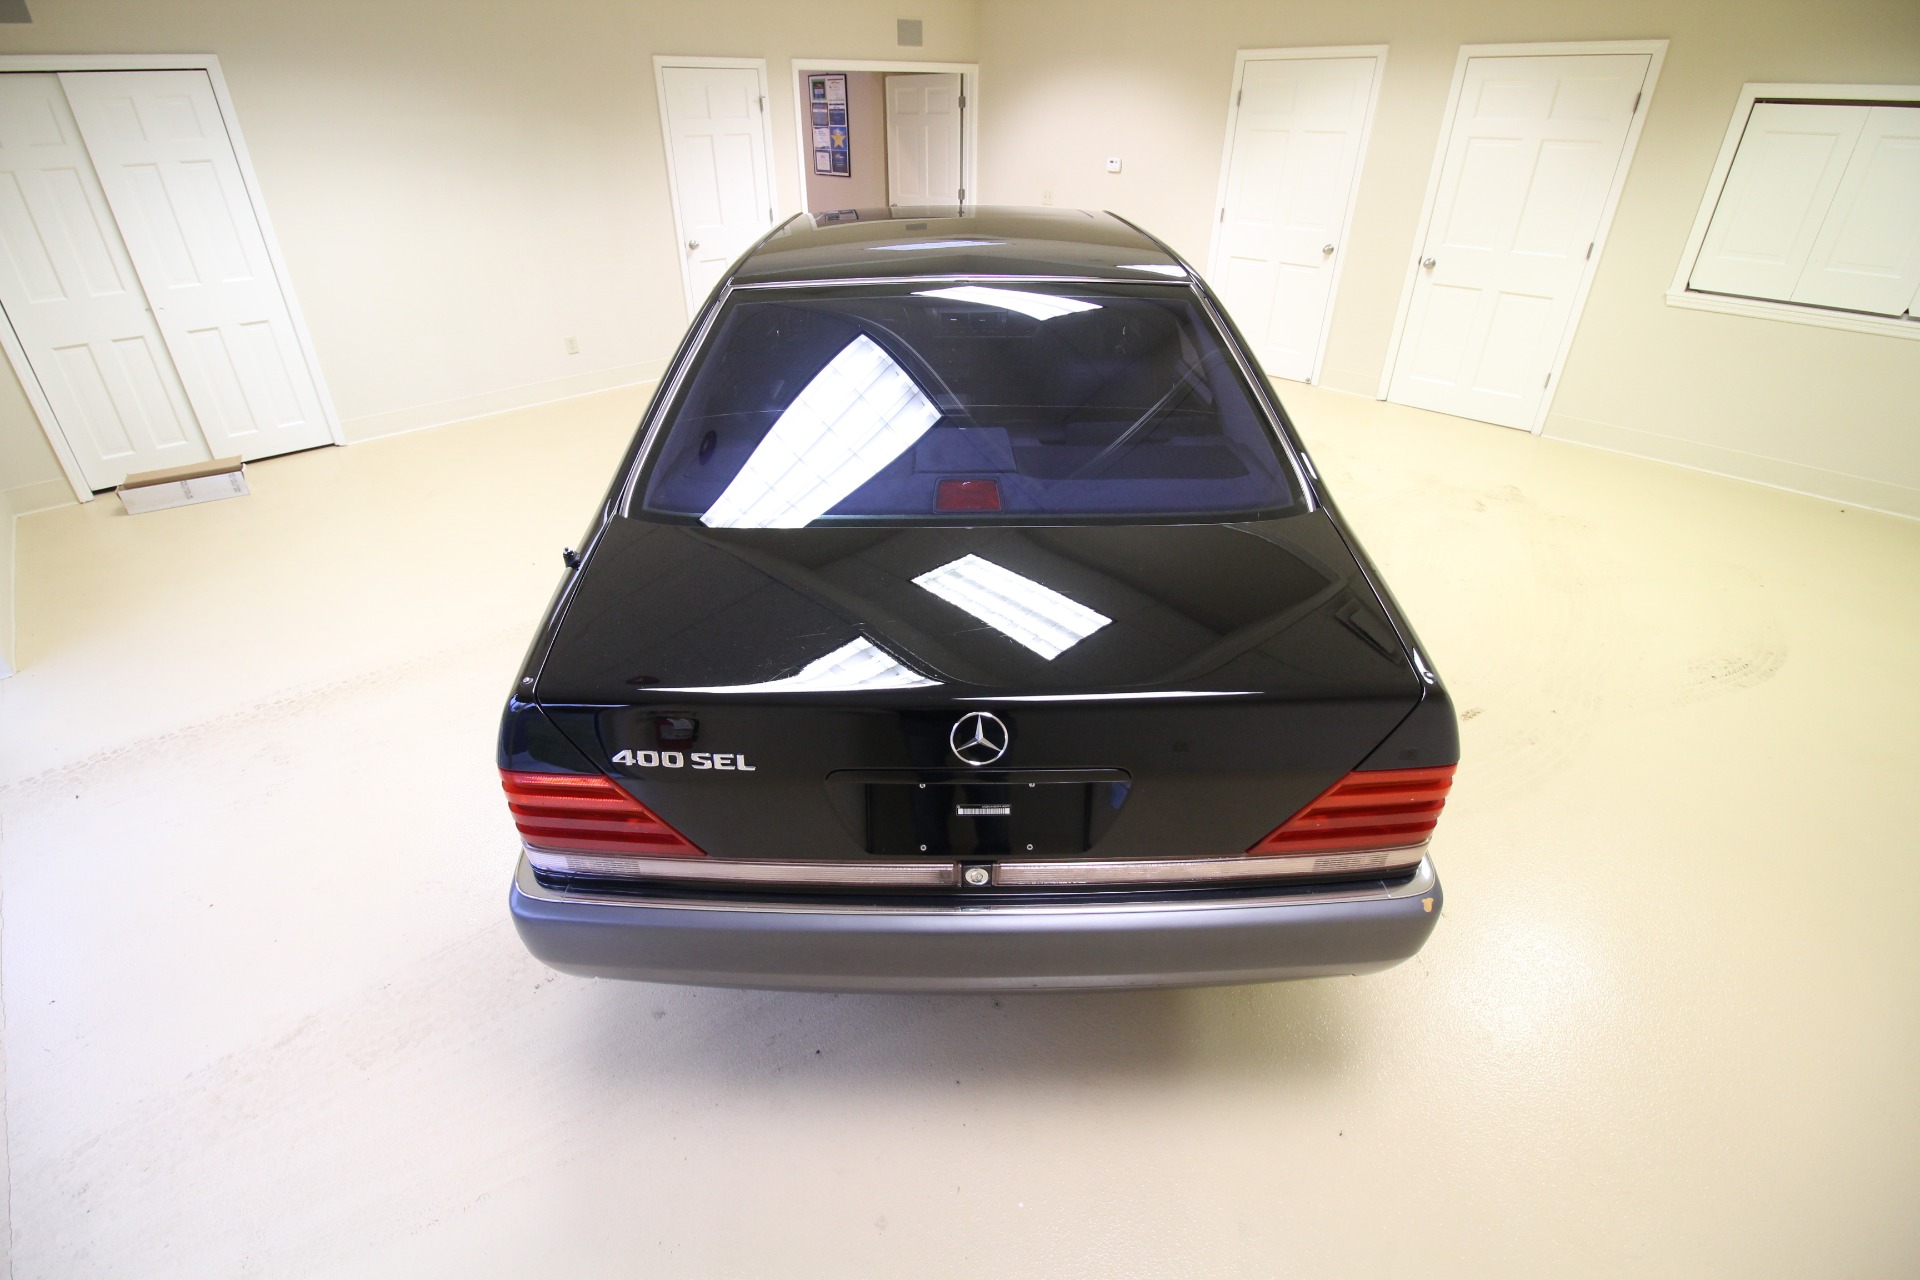 Used 1993 BLACK Mercedes-Benz S-Class 400SEL SEDAN SUPERB INSIDE AND OUT SPECTACULAR W/ LOW MILES | Albany, NY